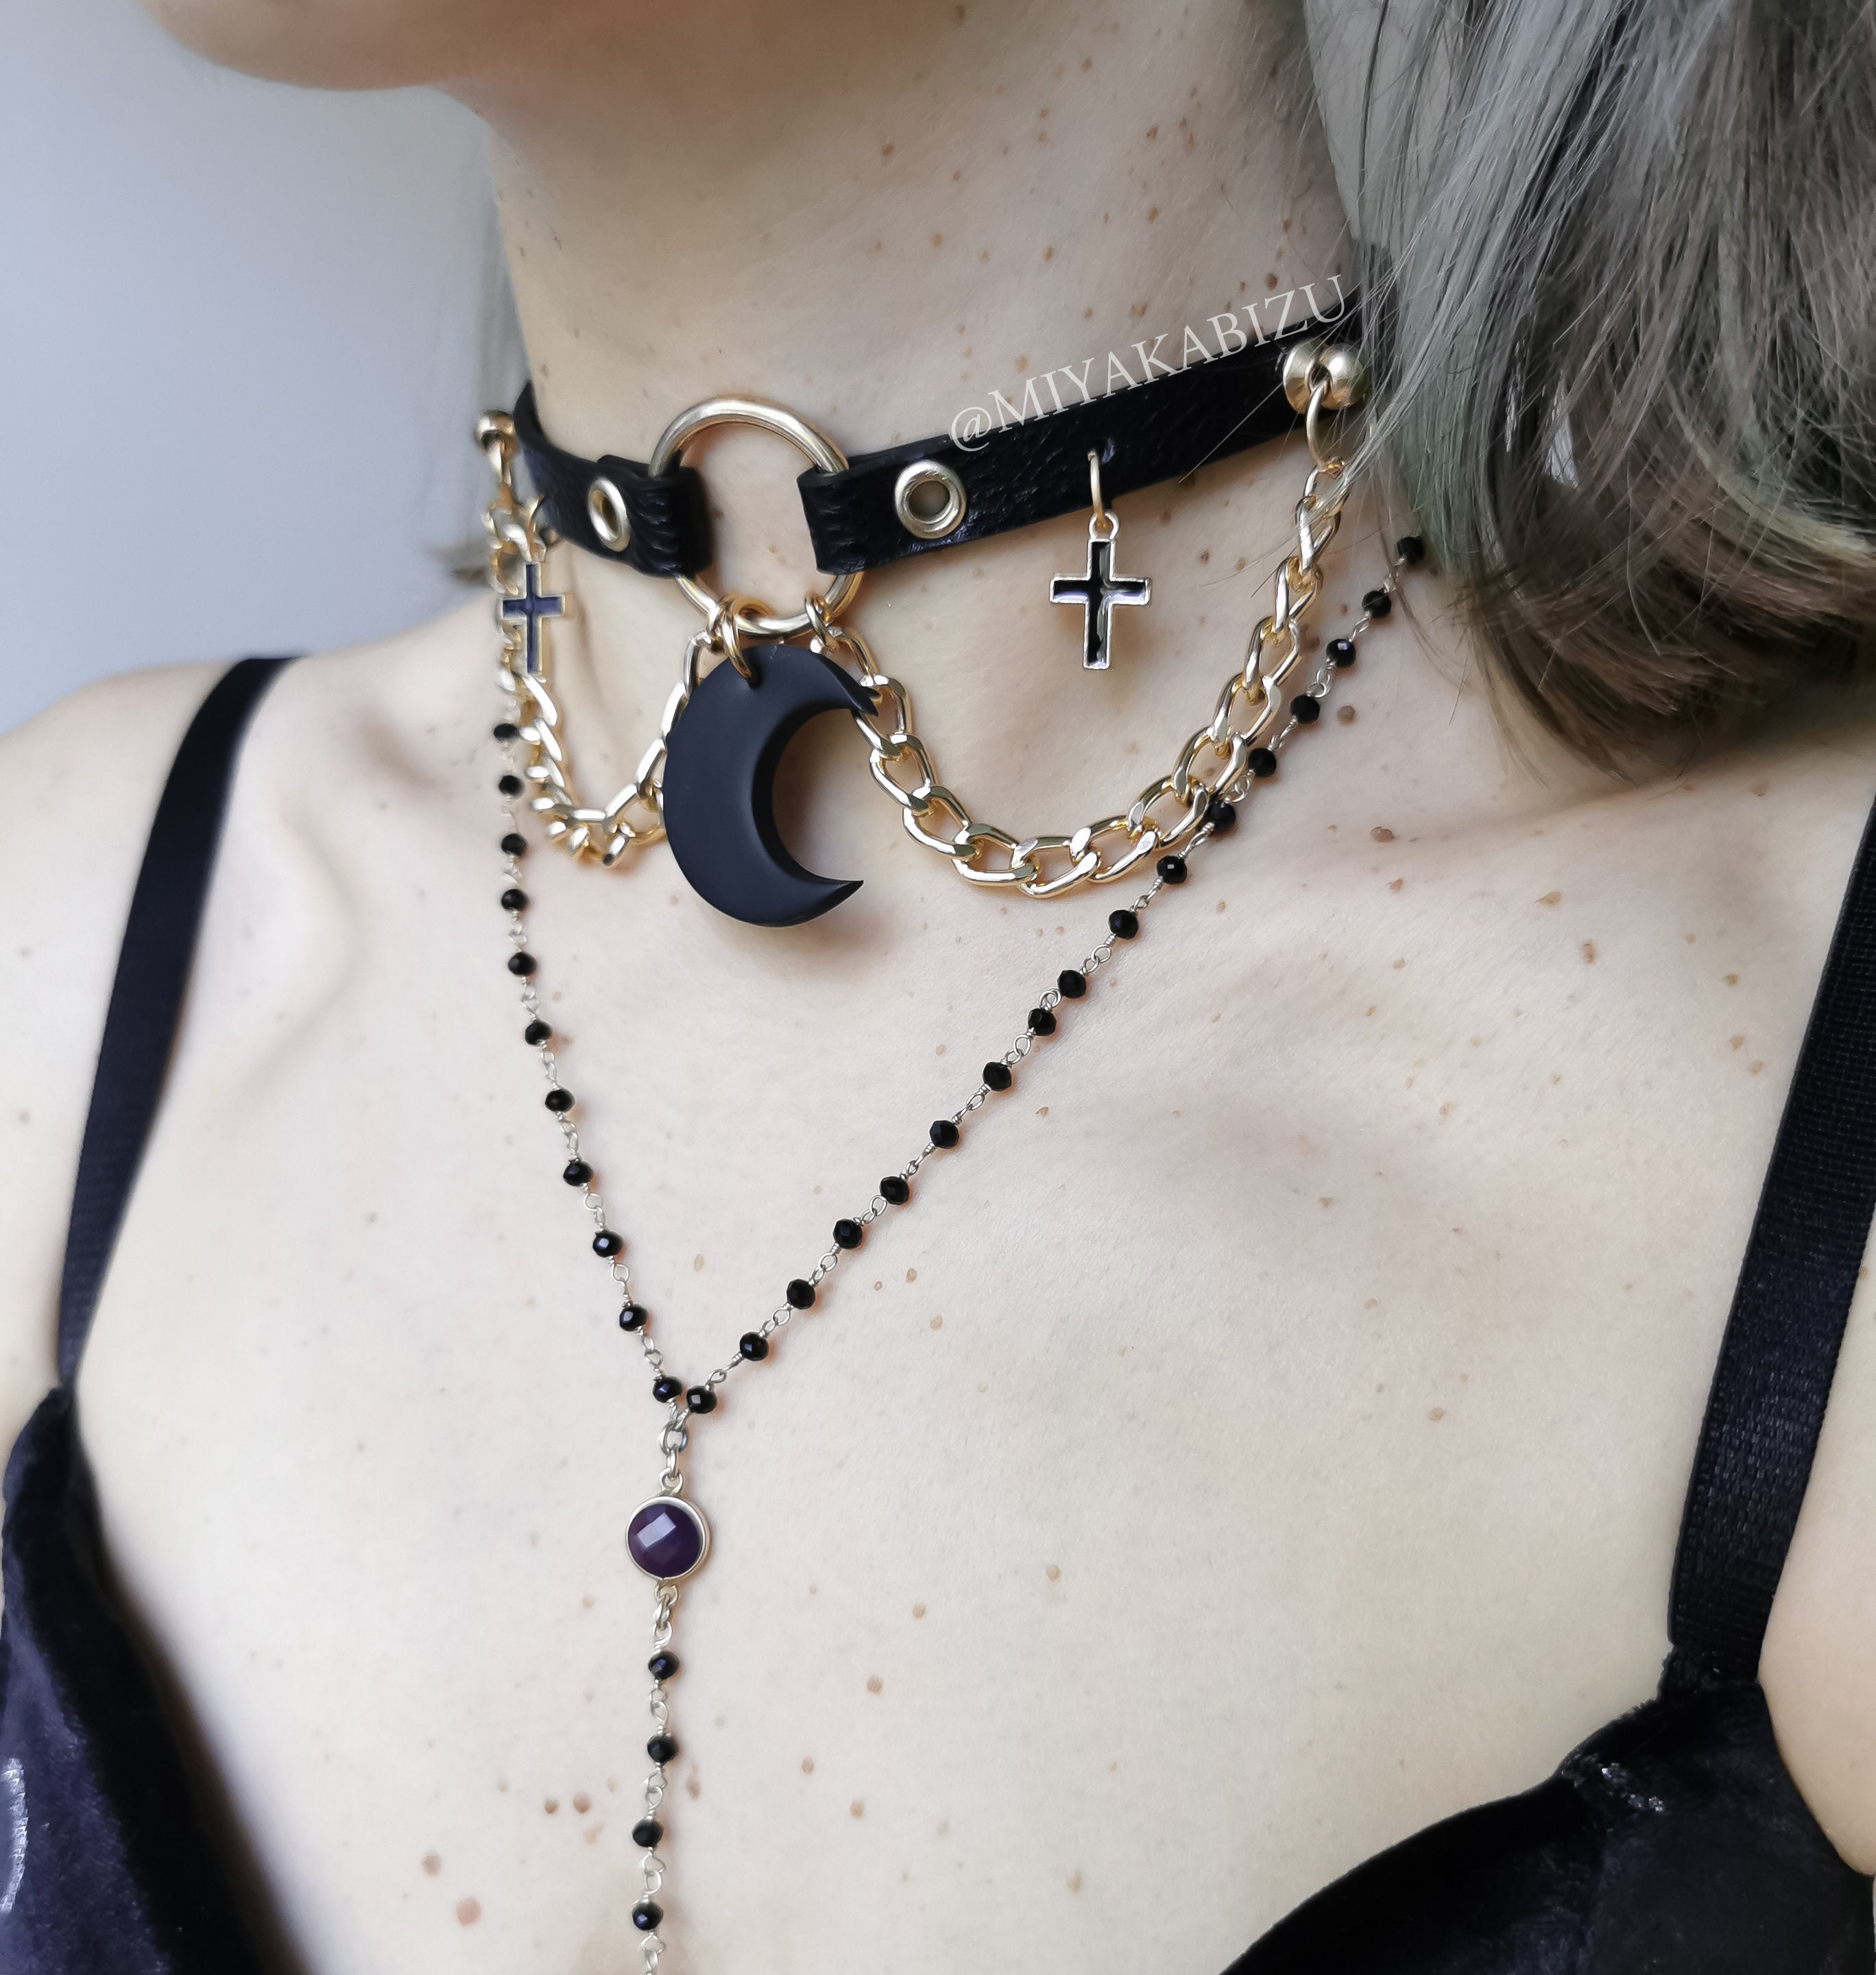 Goth Collar · How To Make A Choker Necklace · Sewing on Cut Out + Keep